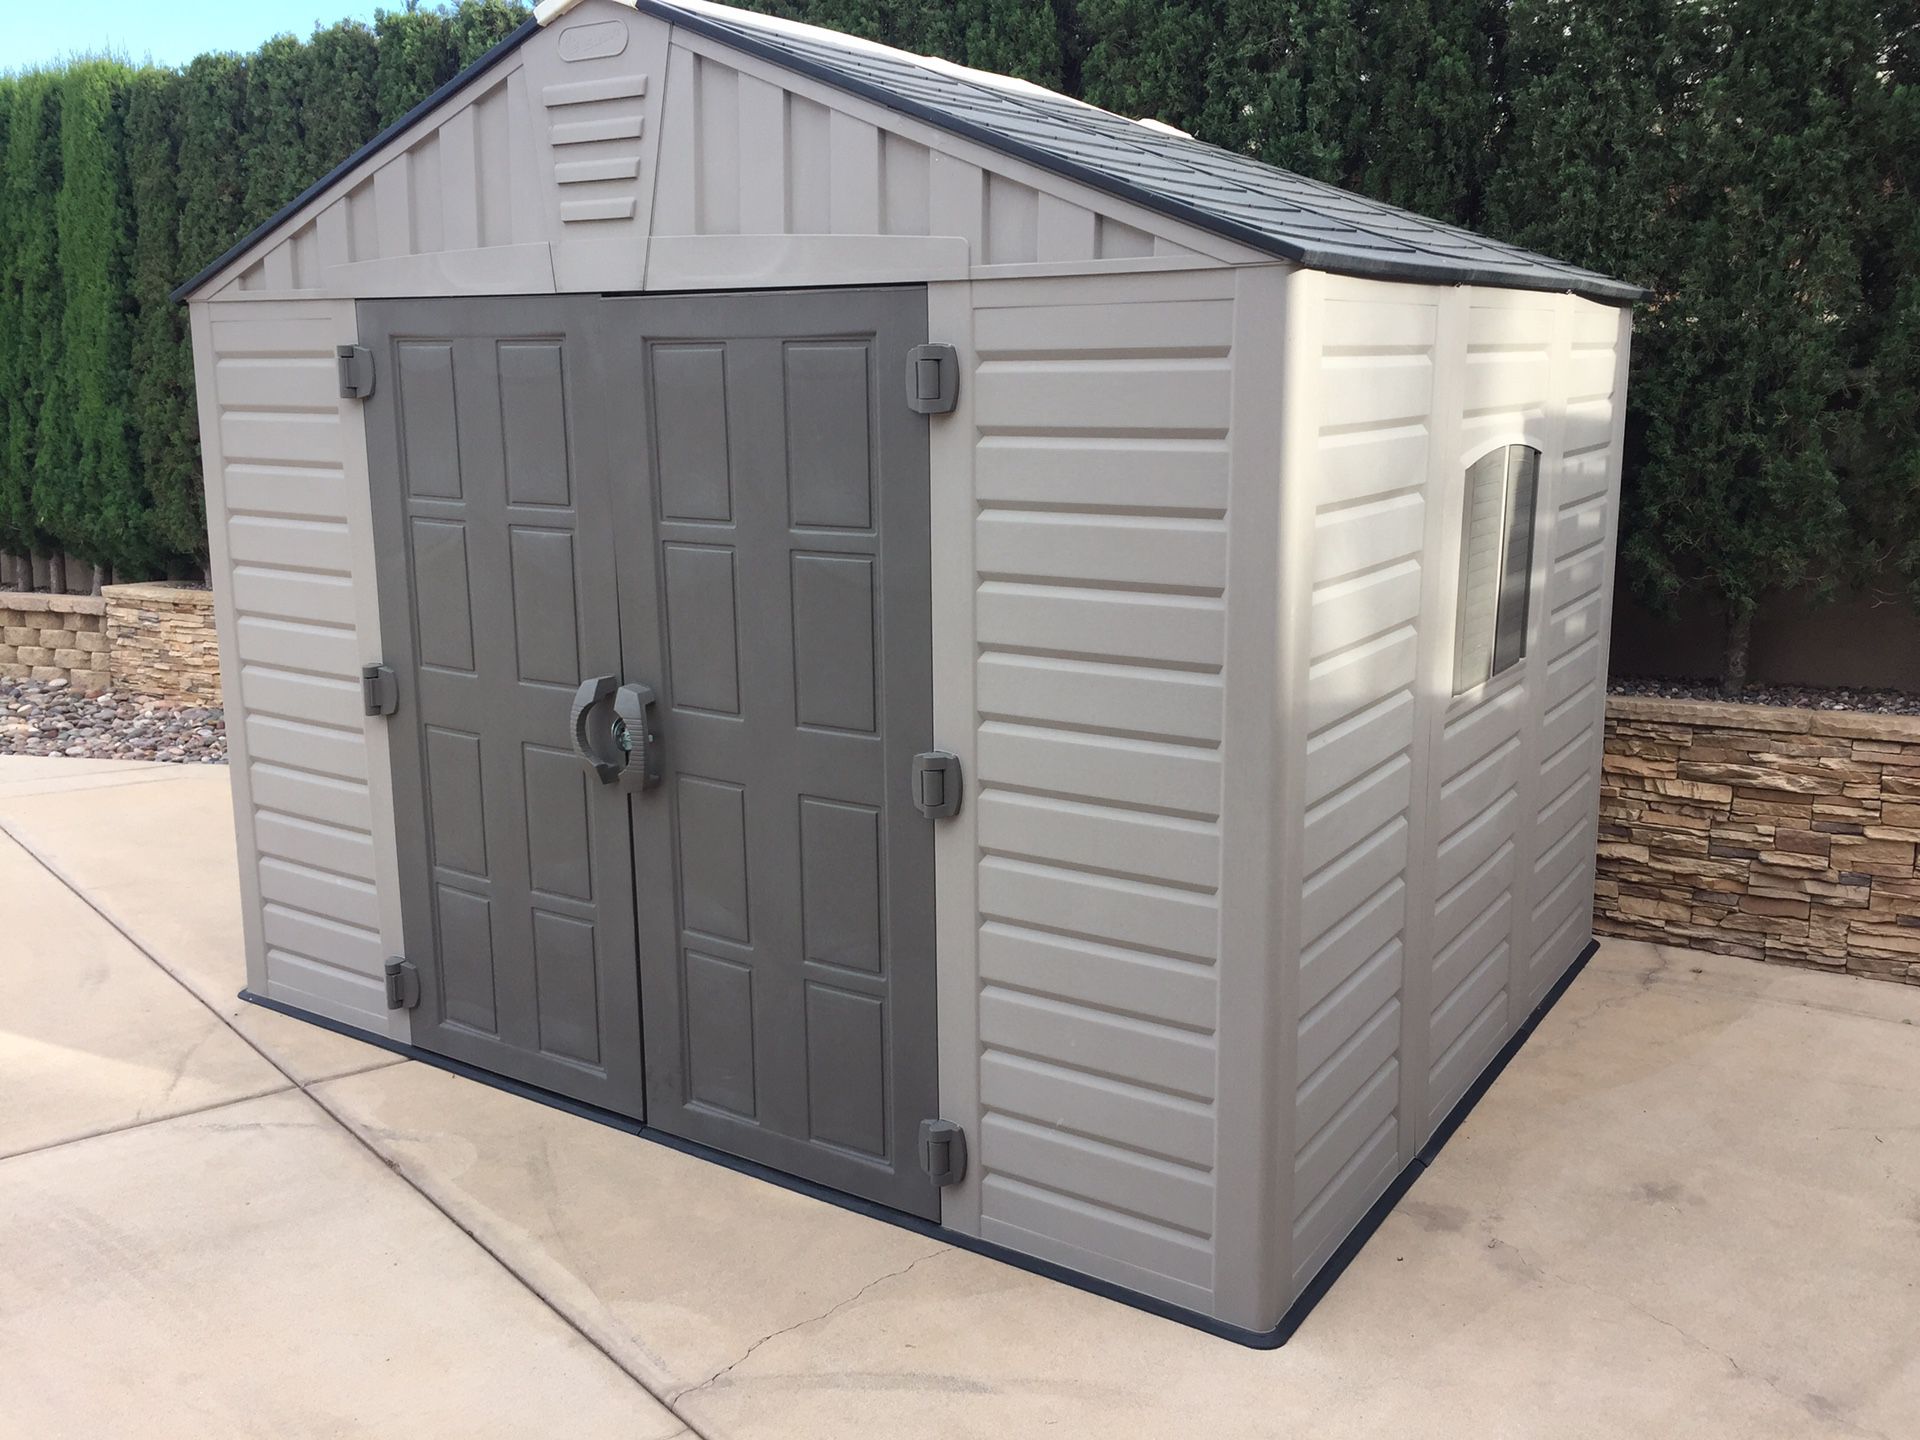 Us leisure 10x8 plastic shed